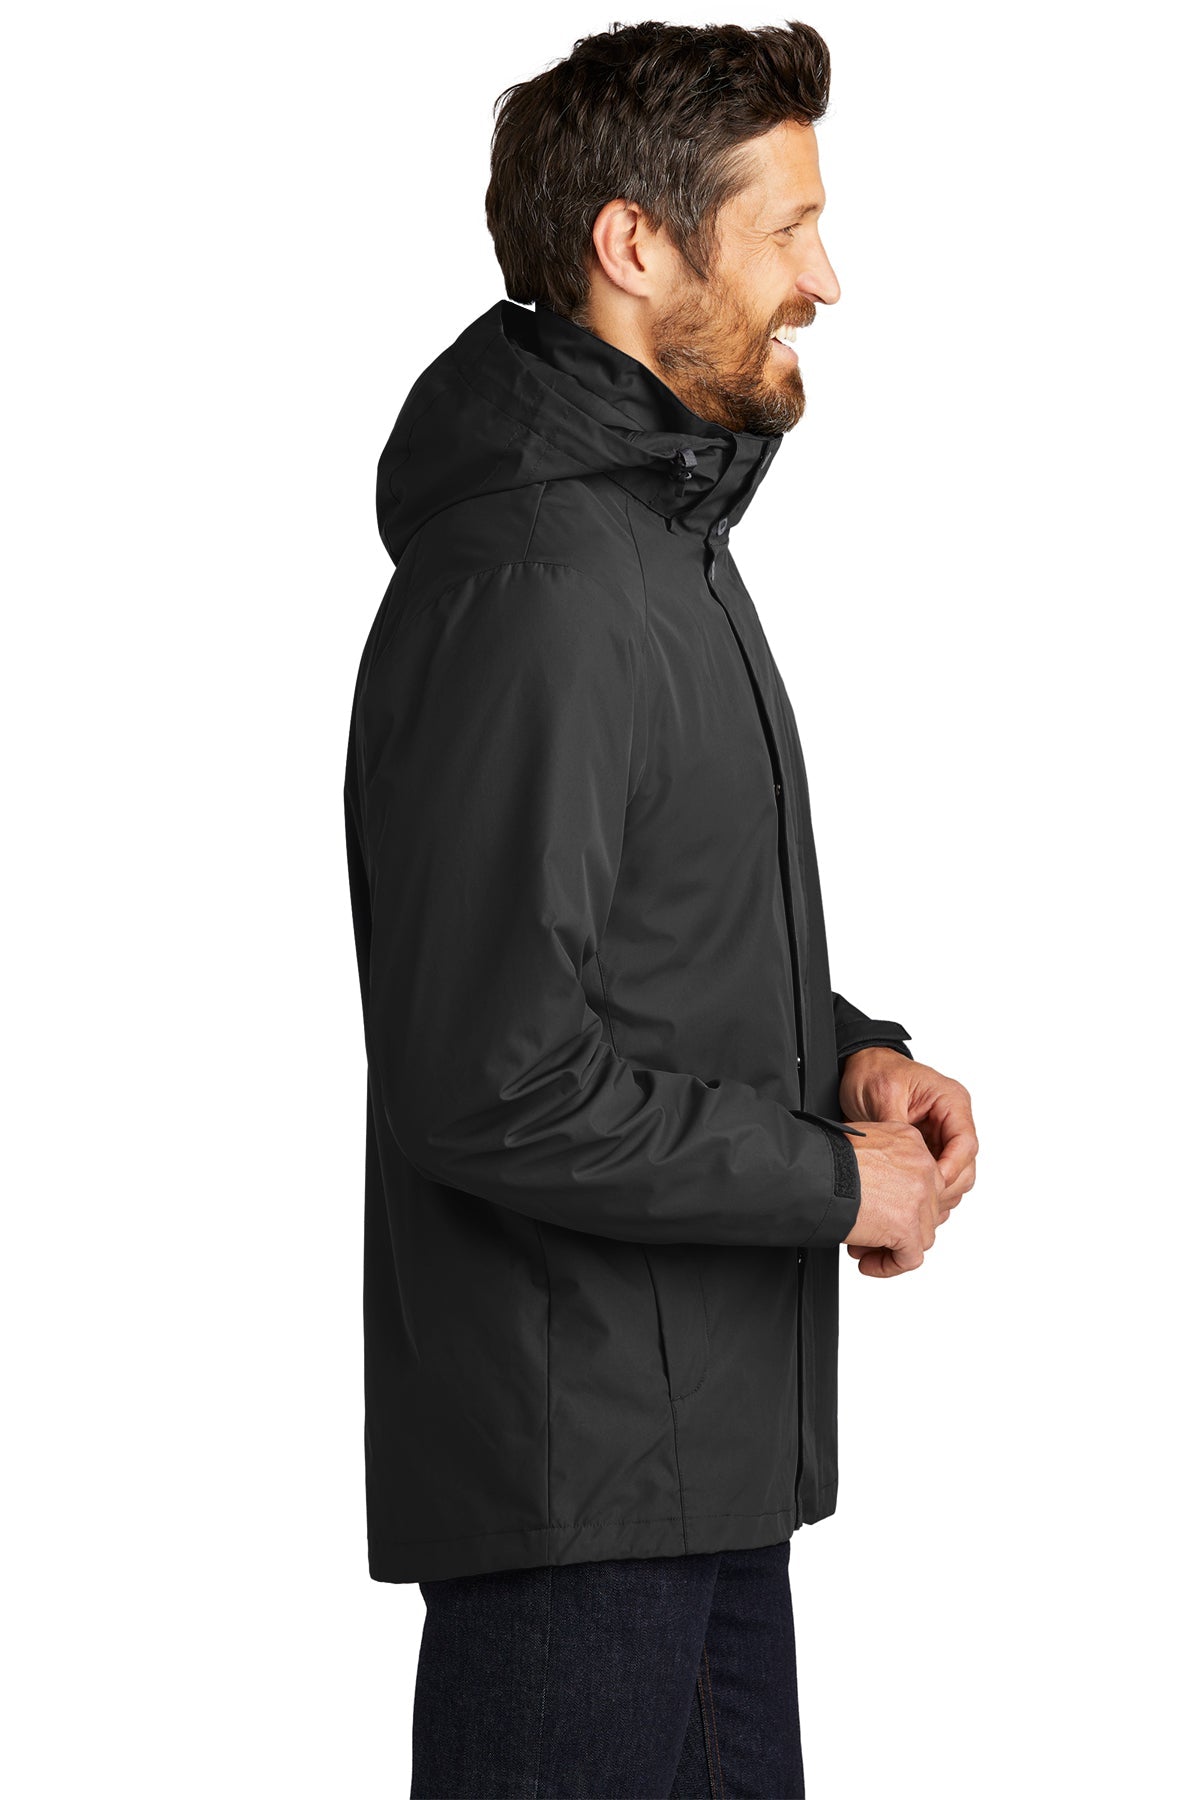 Port Authority All-Weather 3-in-1 Customized Jackets, Black